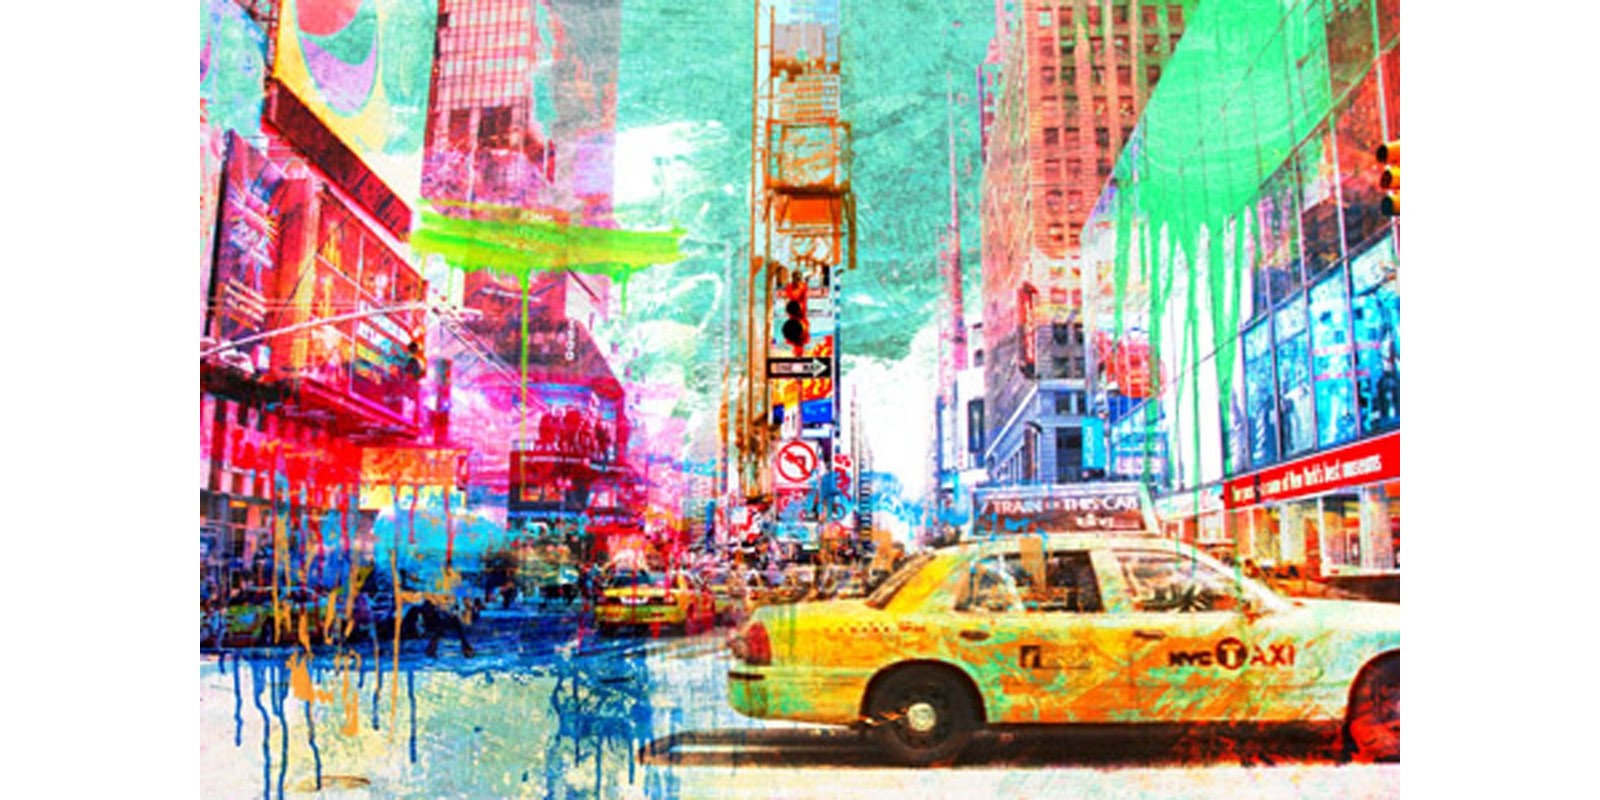 Eric Chestier - Taxis in Times Square 2.0